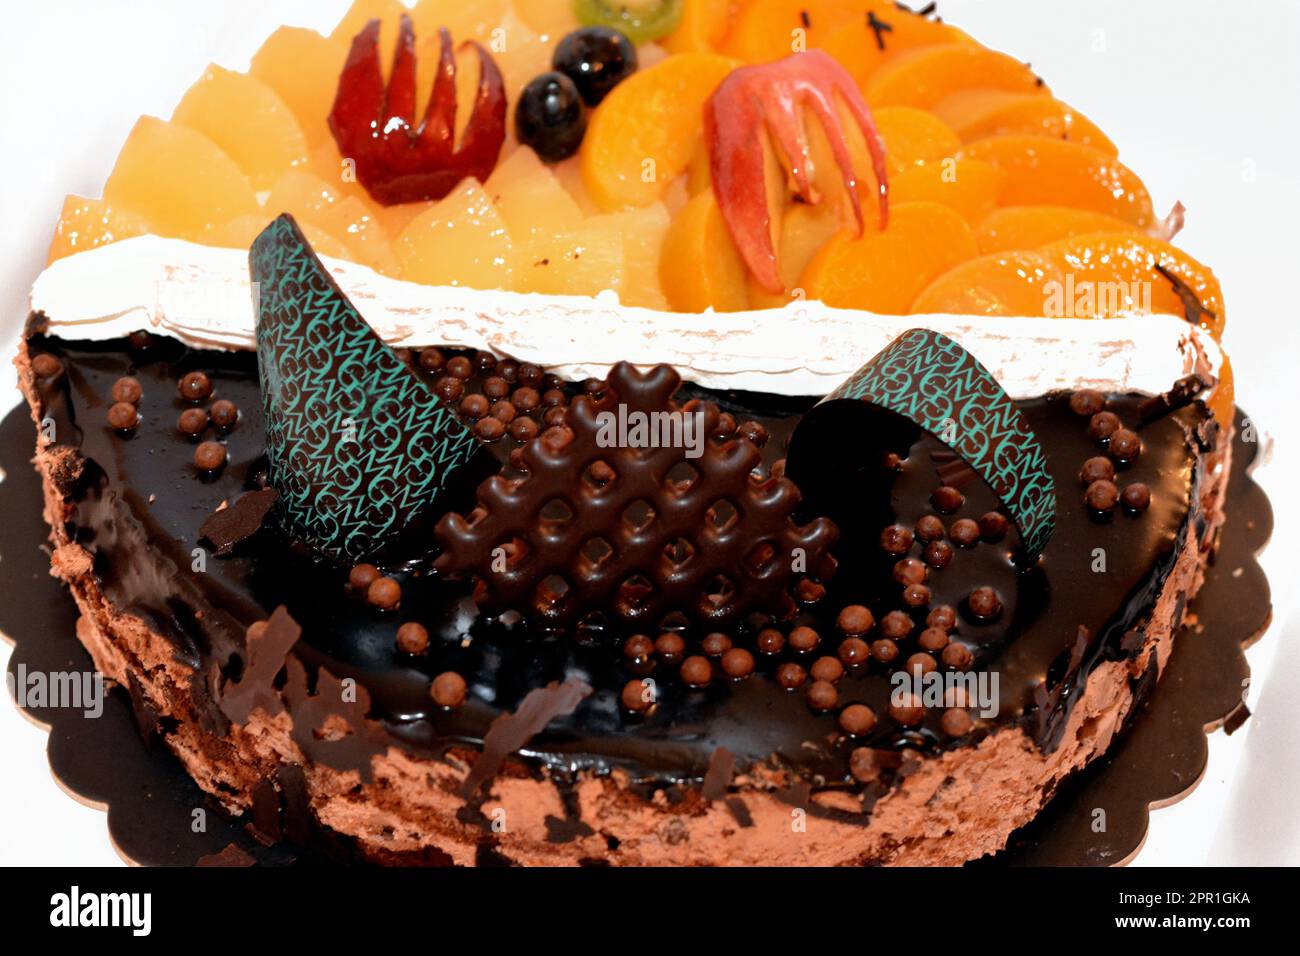 Fresh birthday cake with chocolate bars and pieces, whipped cream, slices of pineapples, apples, black grapes, peach and cherry, a top view of a baked Stock Photo